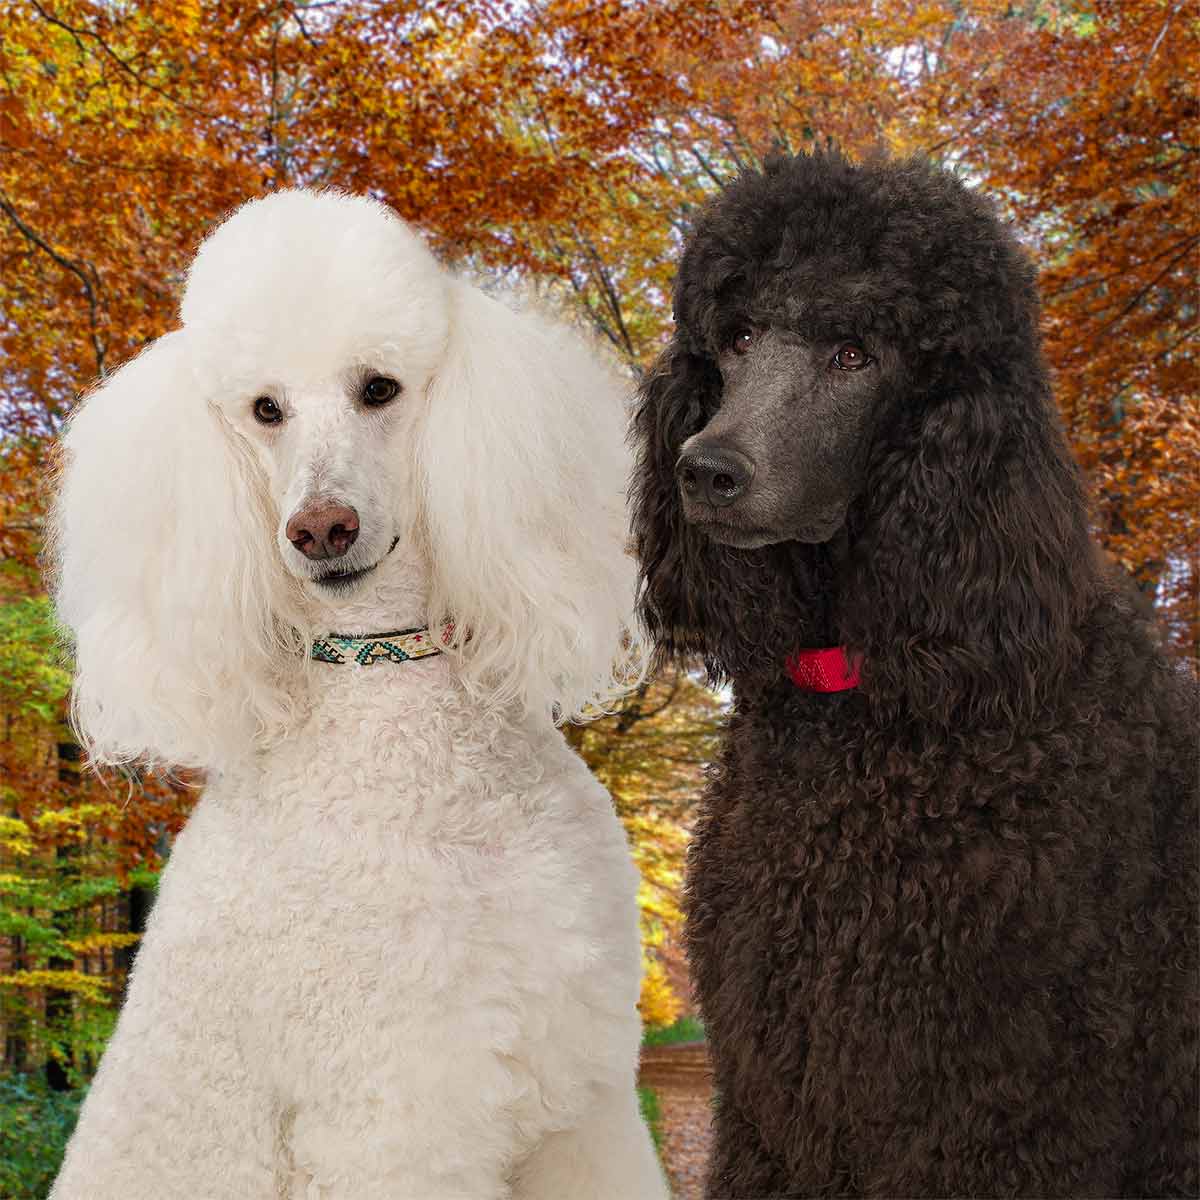 Two dogs standing next to each other in a park.